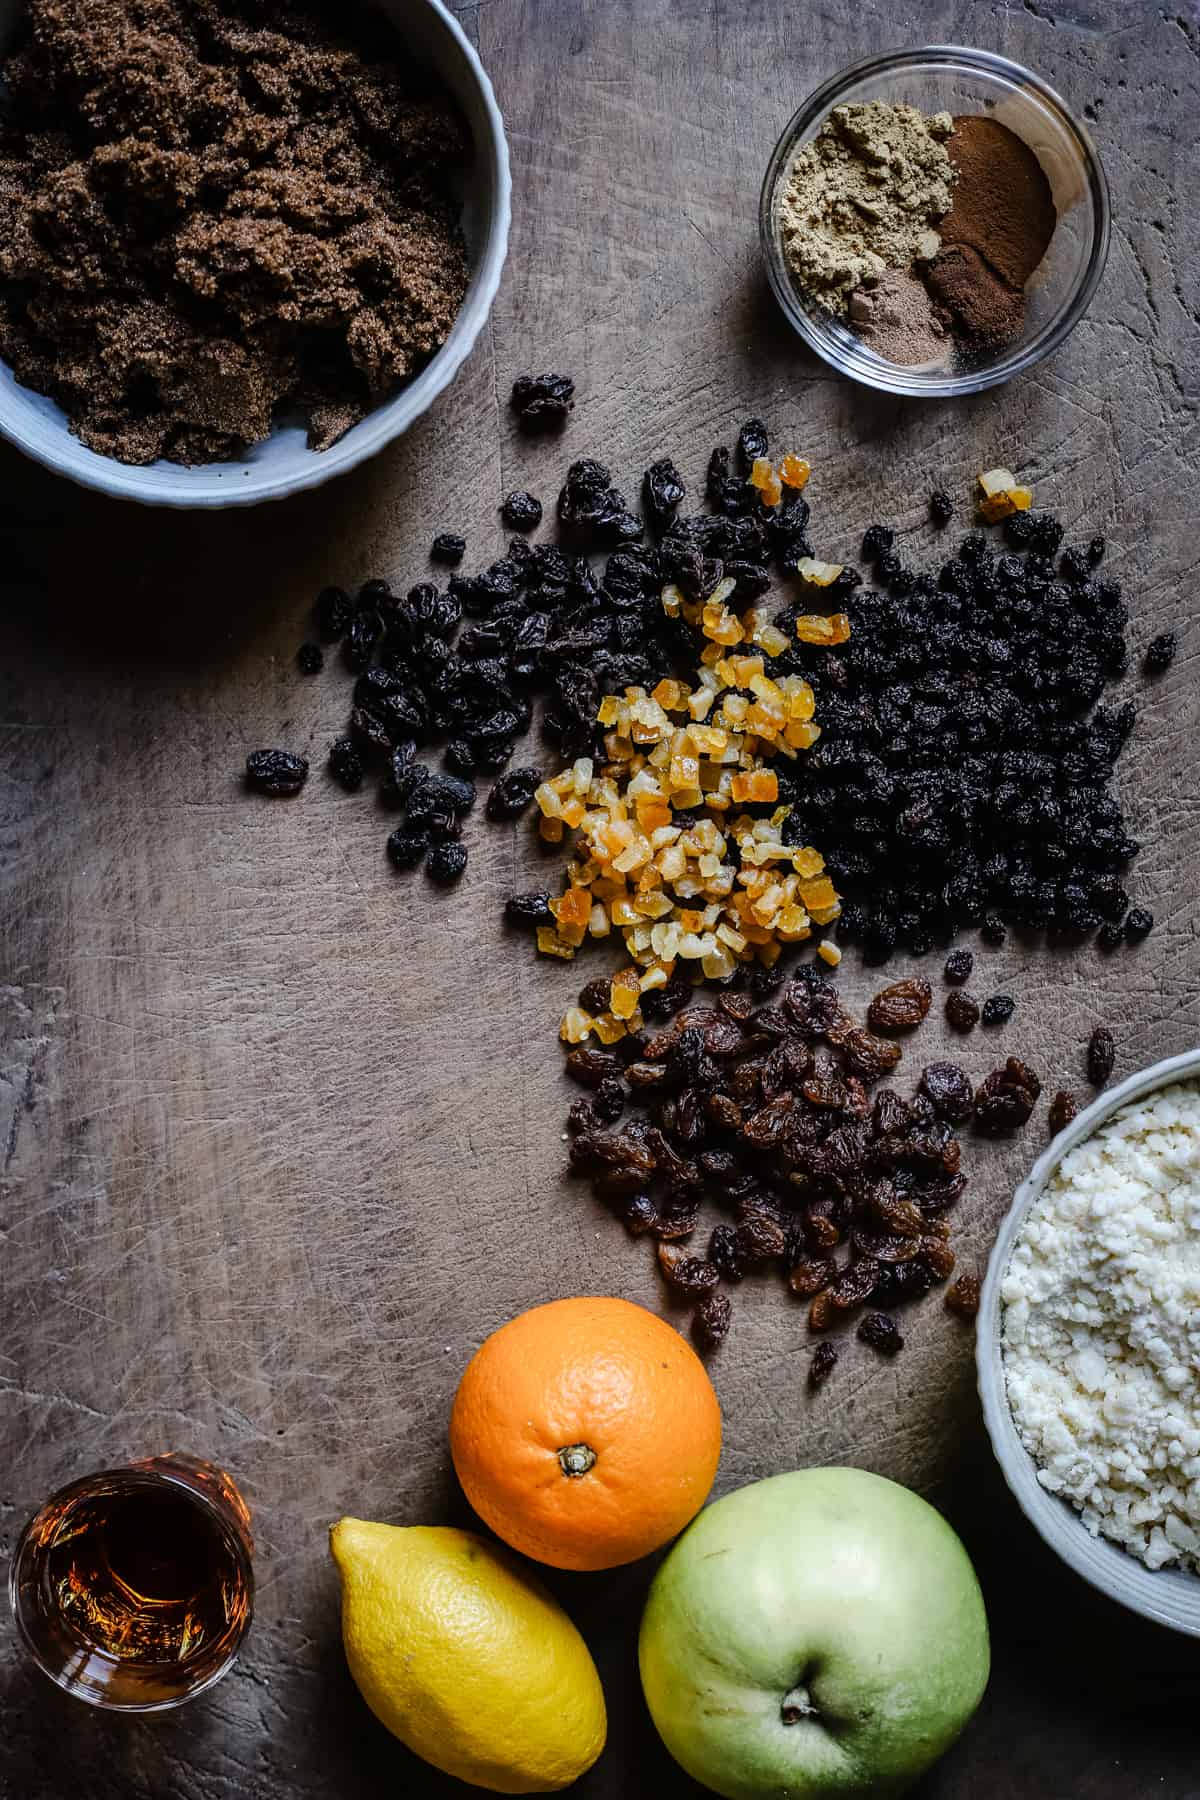 Ingredients for mincemeat on a wooden table